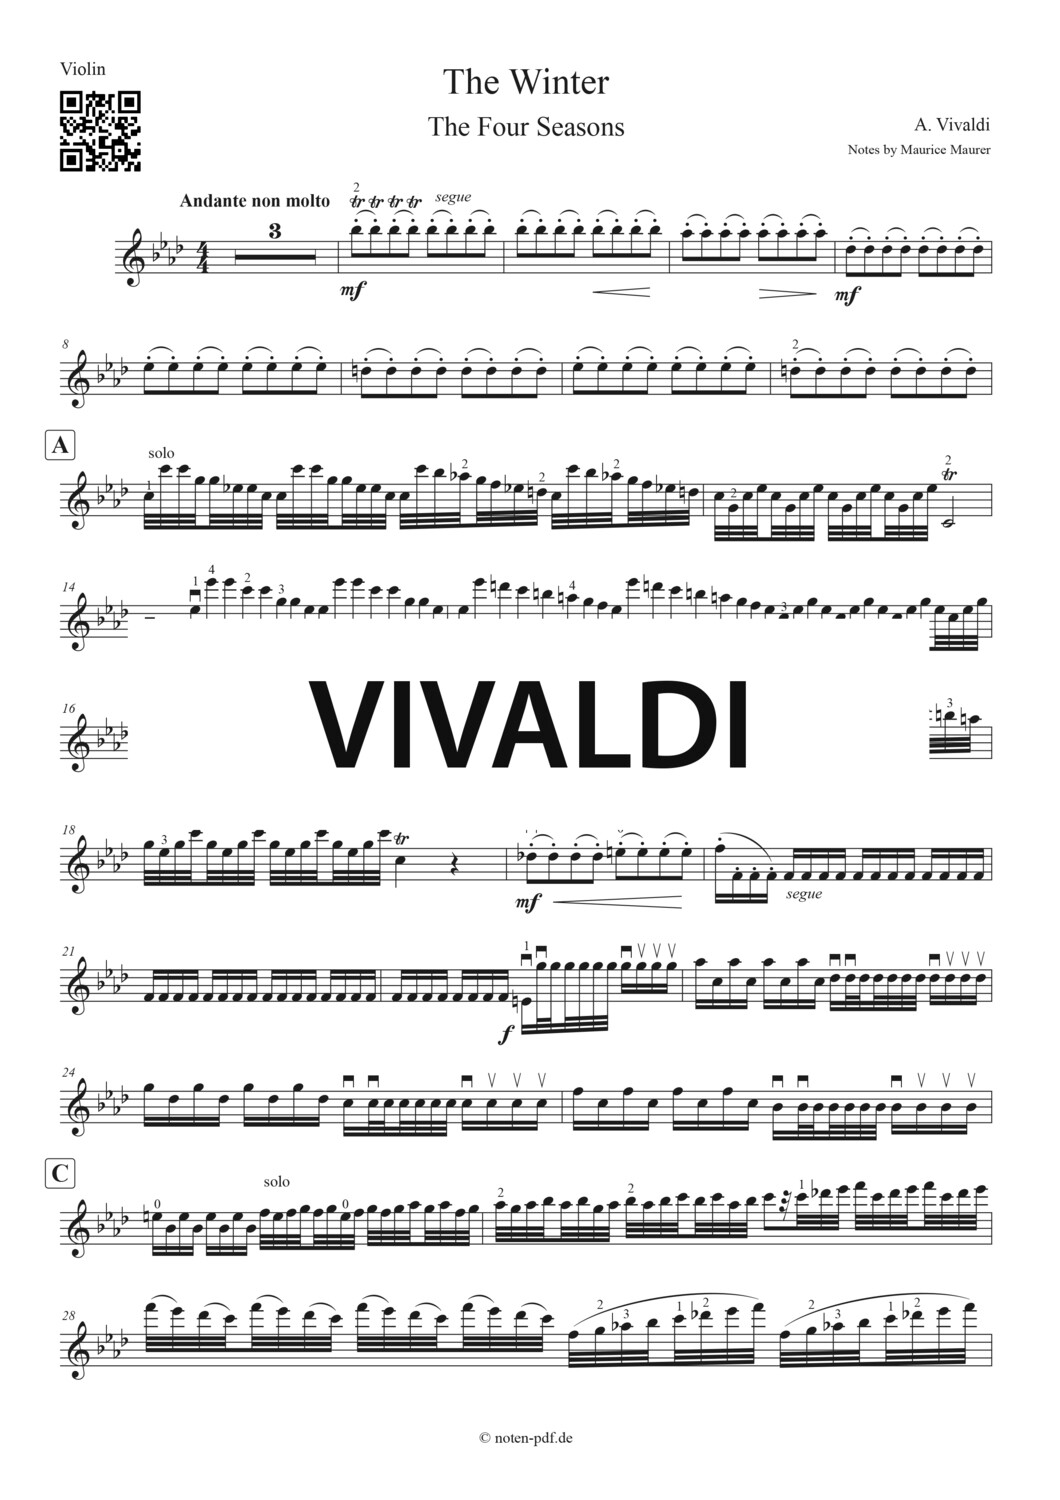 Vivaldi: The Winter from "The Four Seasons" - All Movements